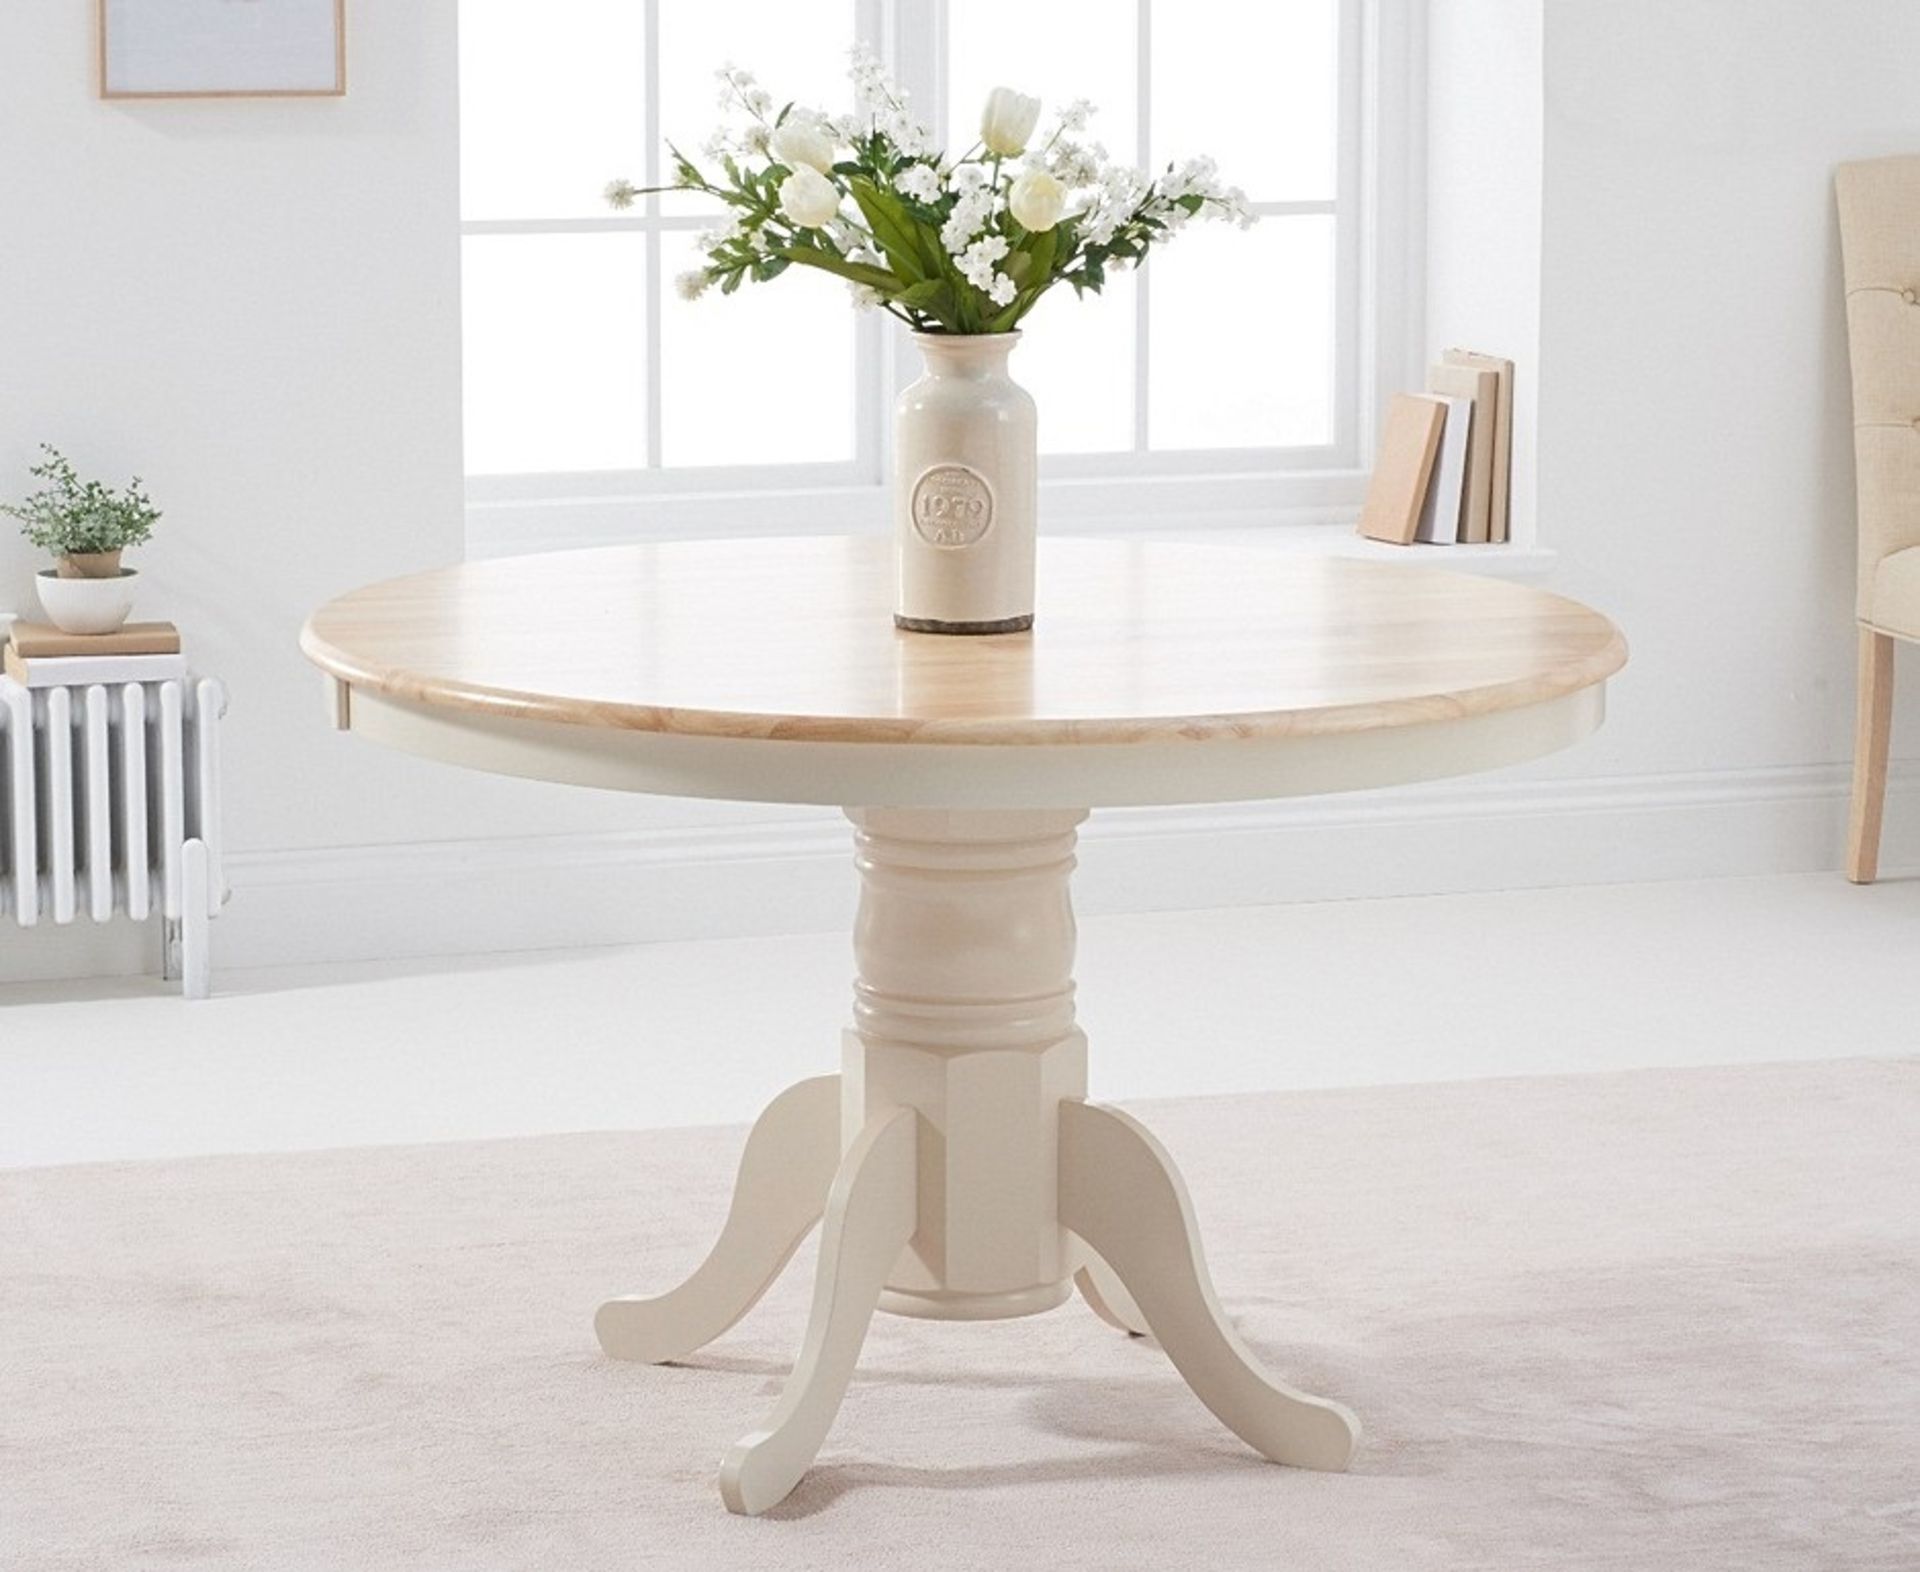 Epsom Cream Dining Table The Epsom Collection The Epsom collection is a diverse range of